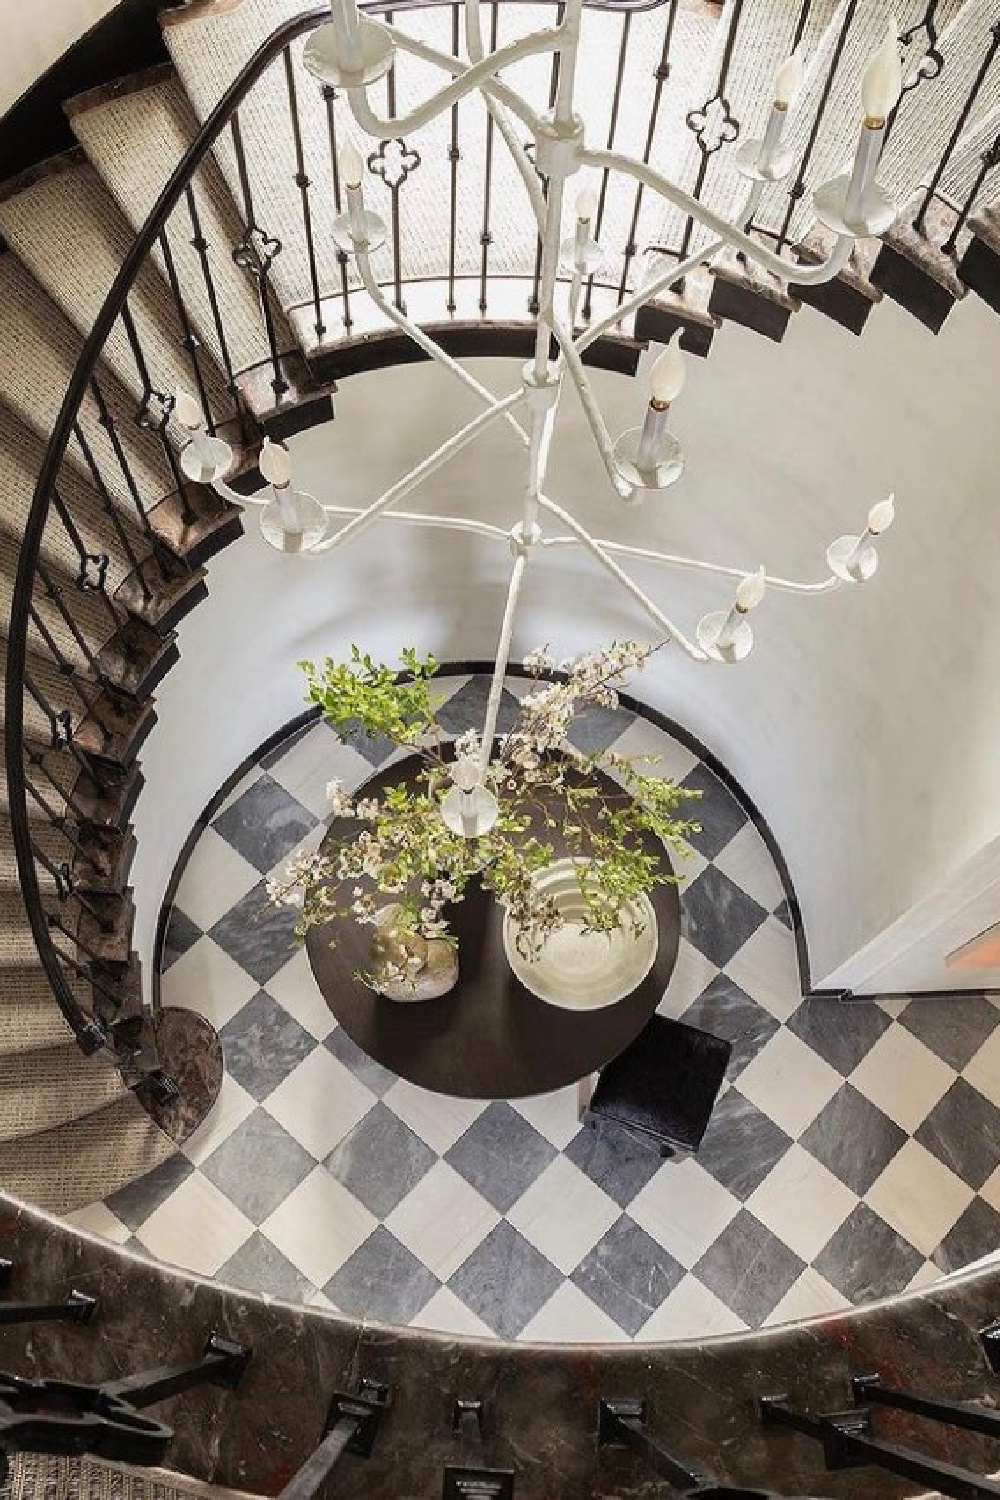 Magnificent staircase and interior design (@mimiandhill) with Tara Shaw designed chandelier. #tarashaw #staircasedesign